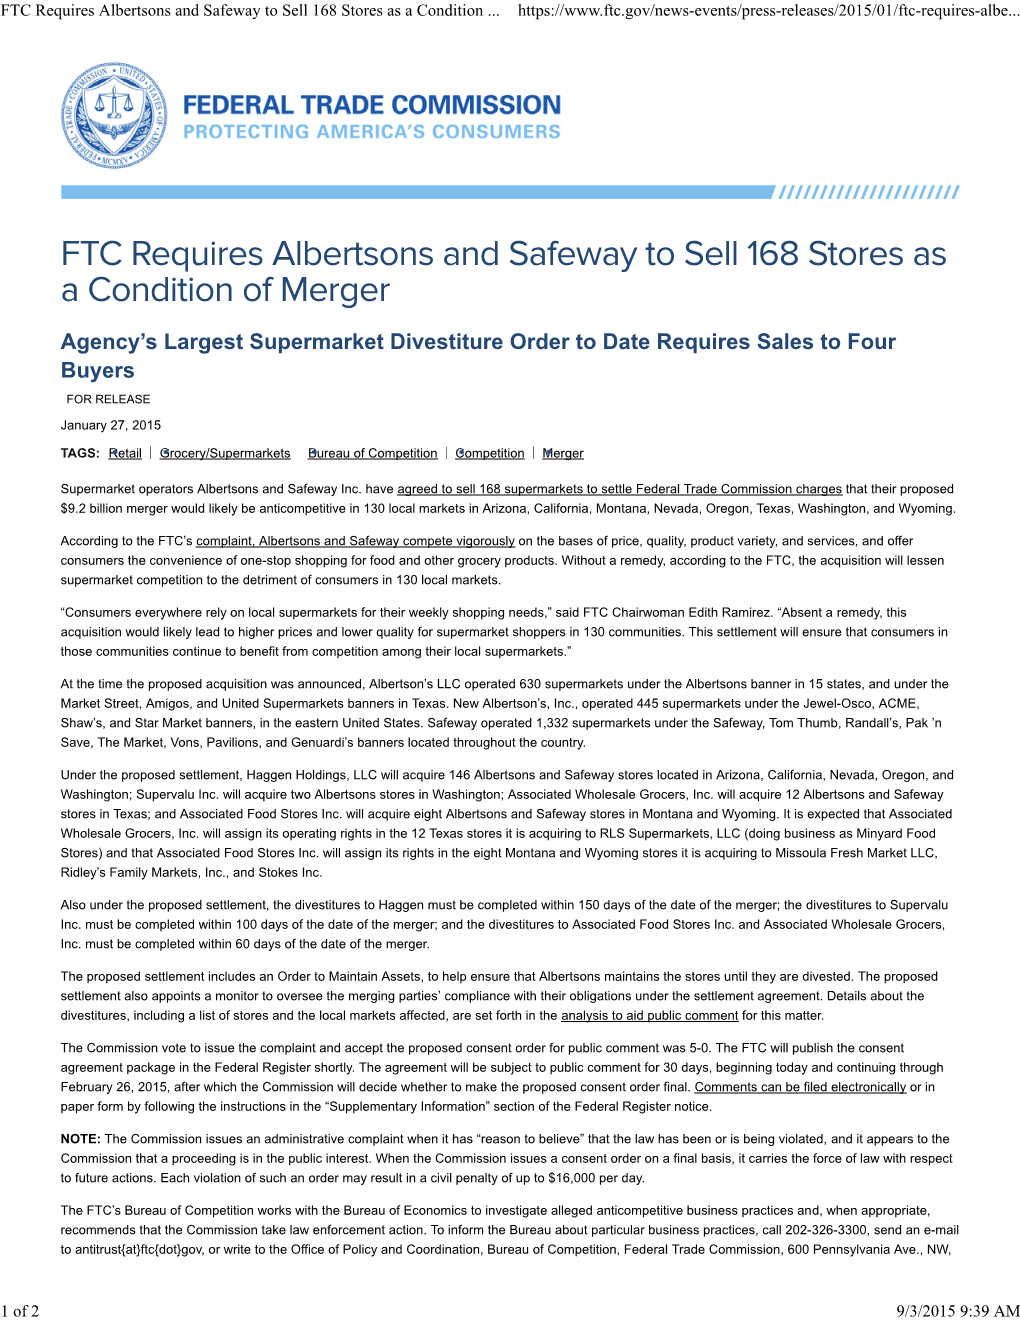 FTC Requires Albertsons and Safeway to Sell 168 Stores As a Condition of Merger | Federal Trade Commission